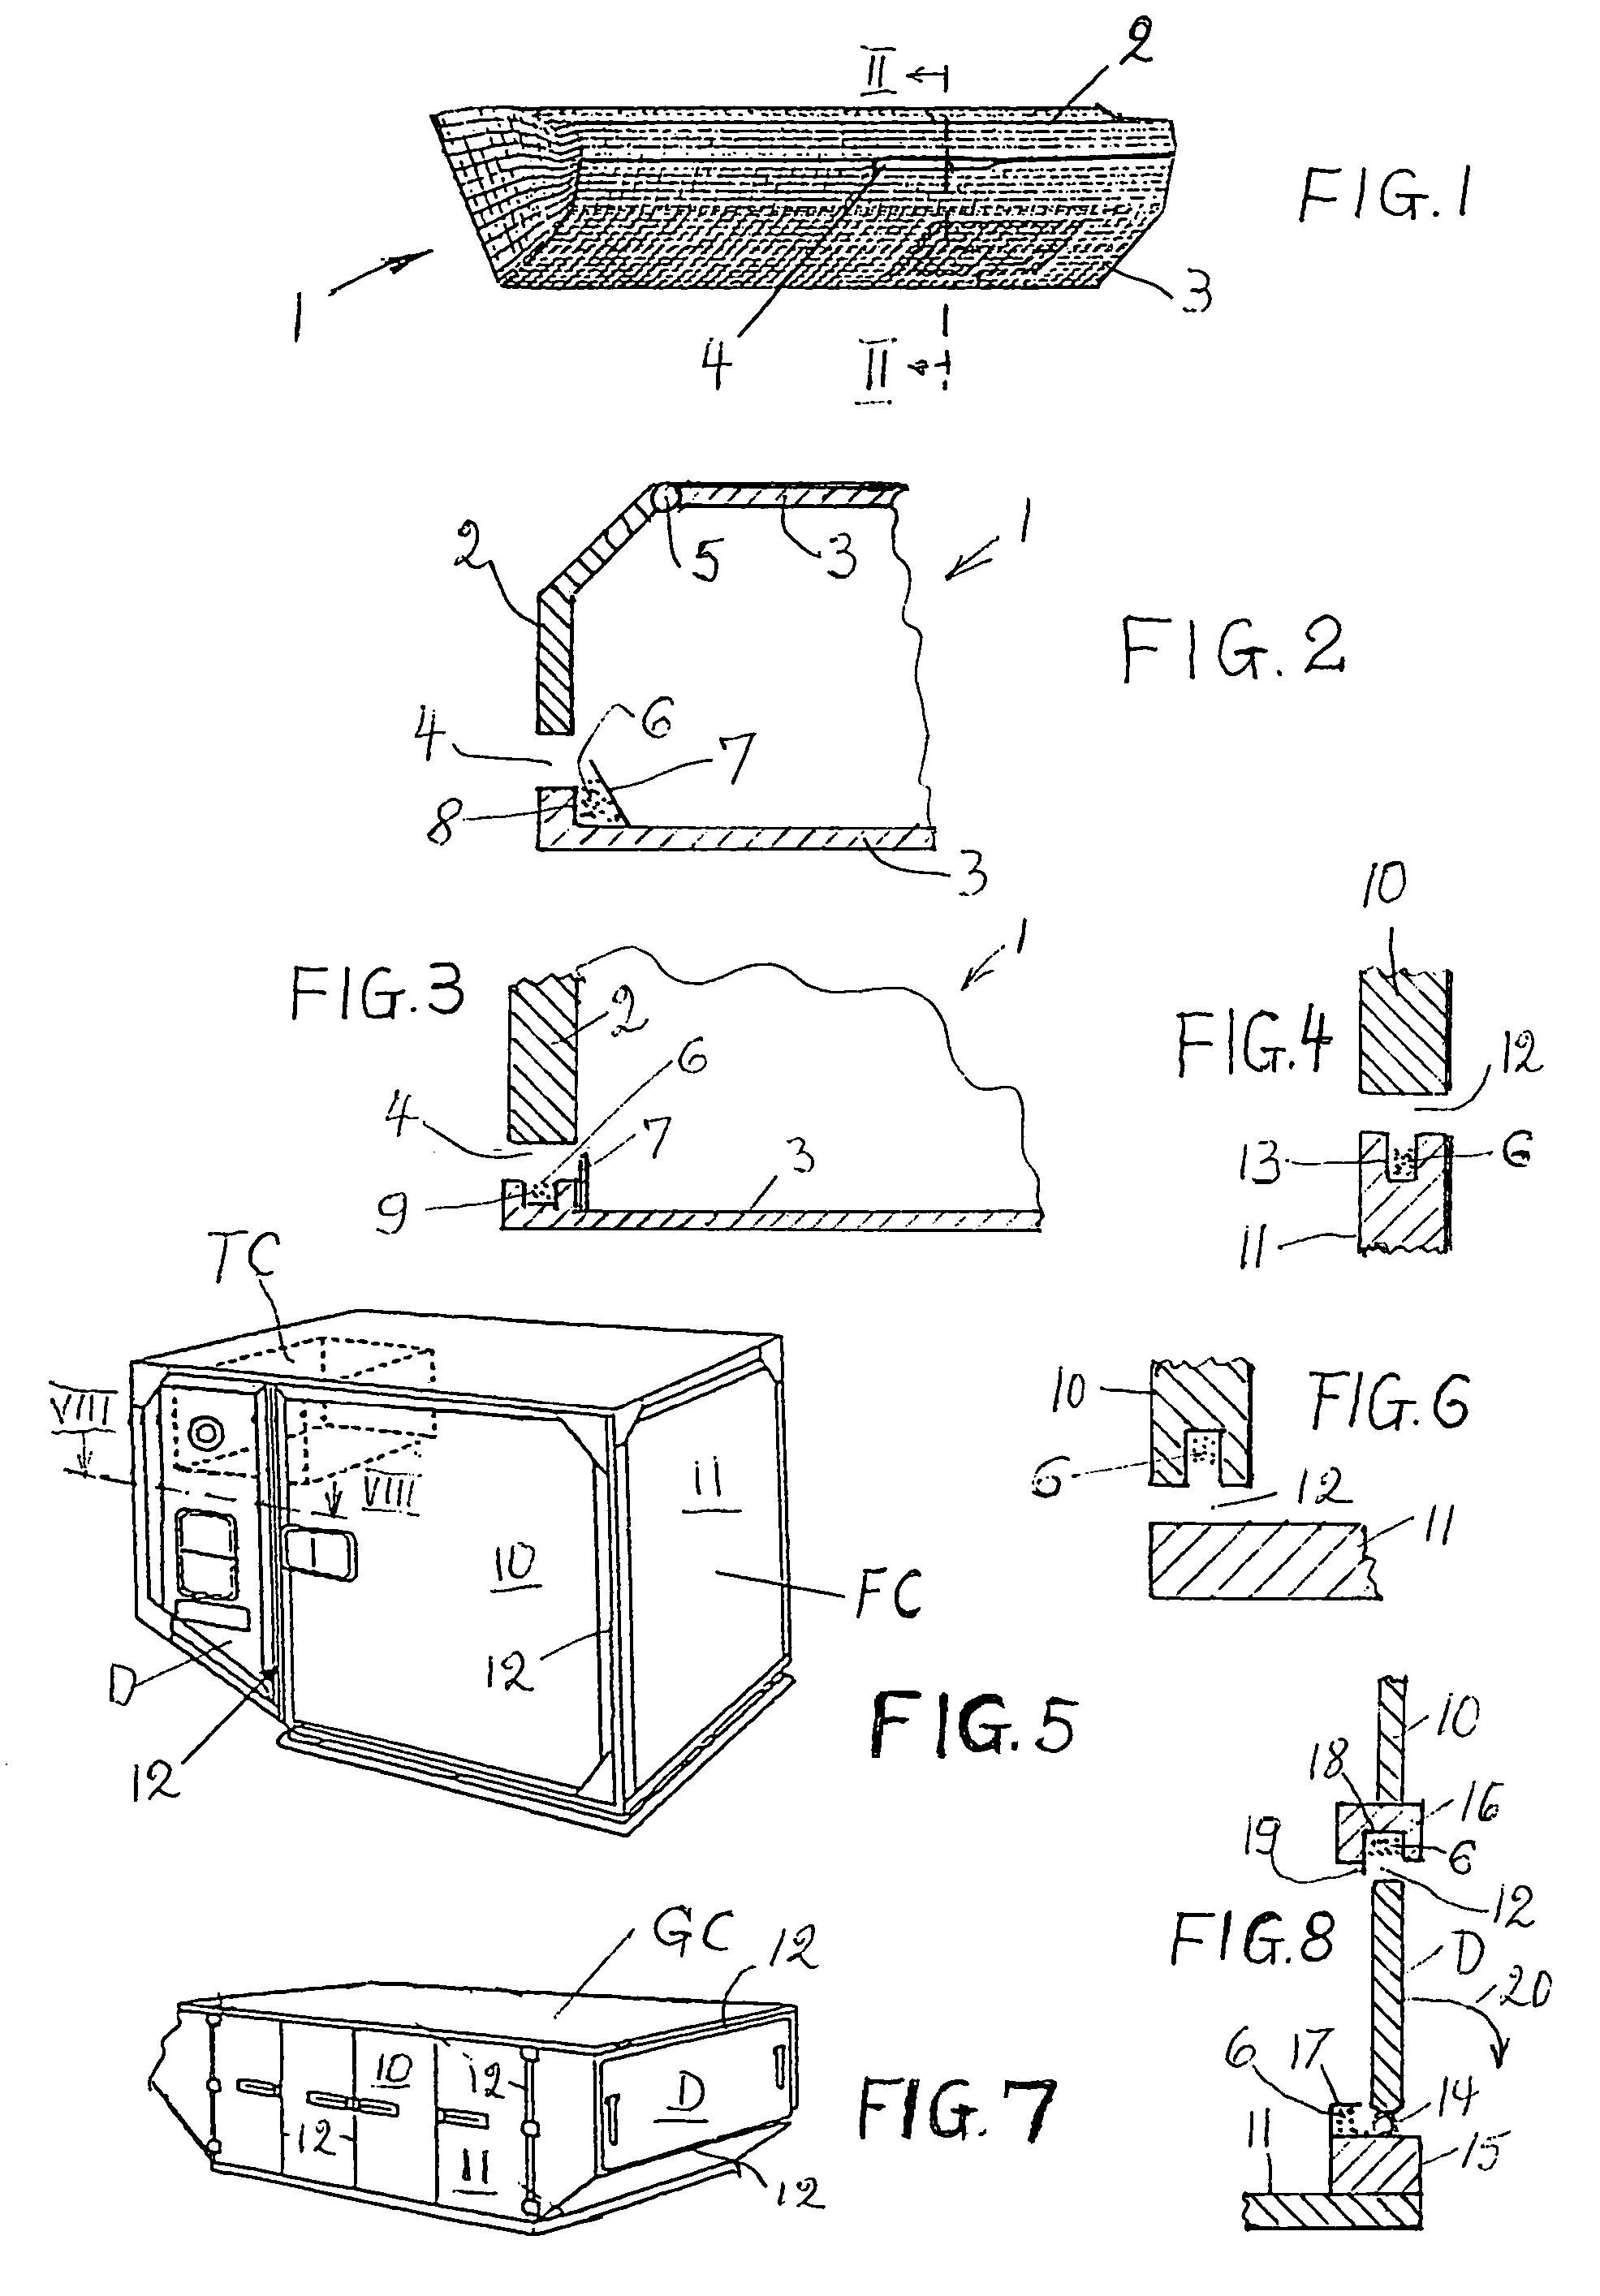 Method and apparatus for detecting smoke and smothering a fire